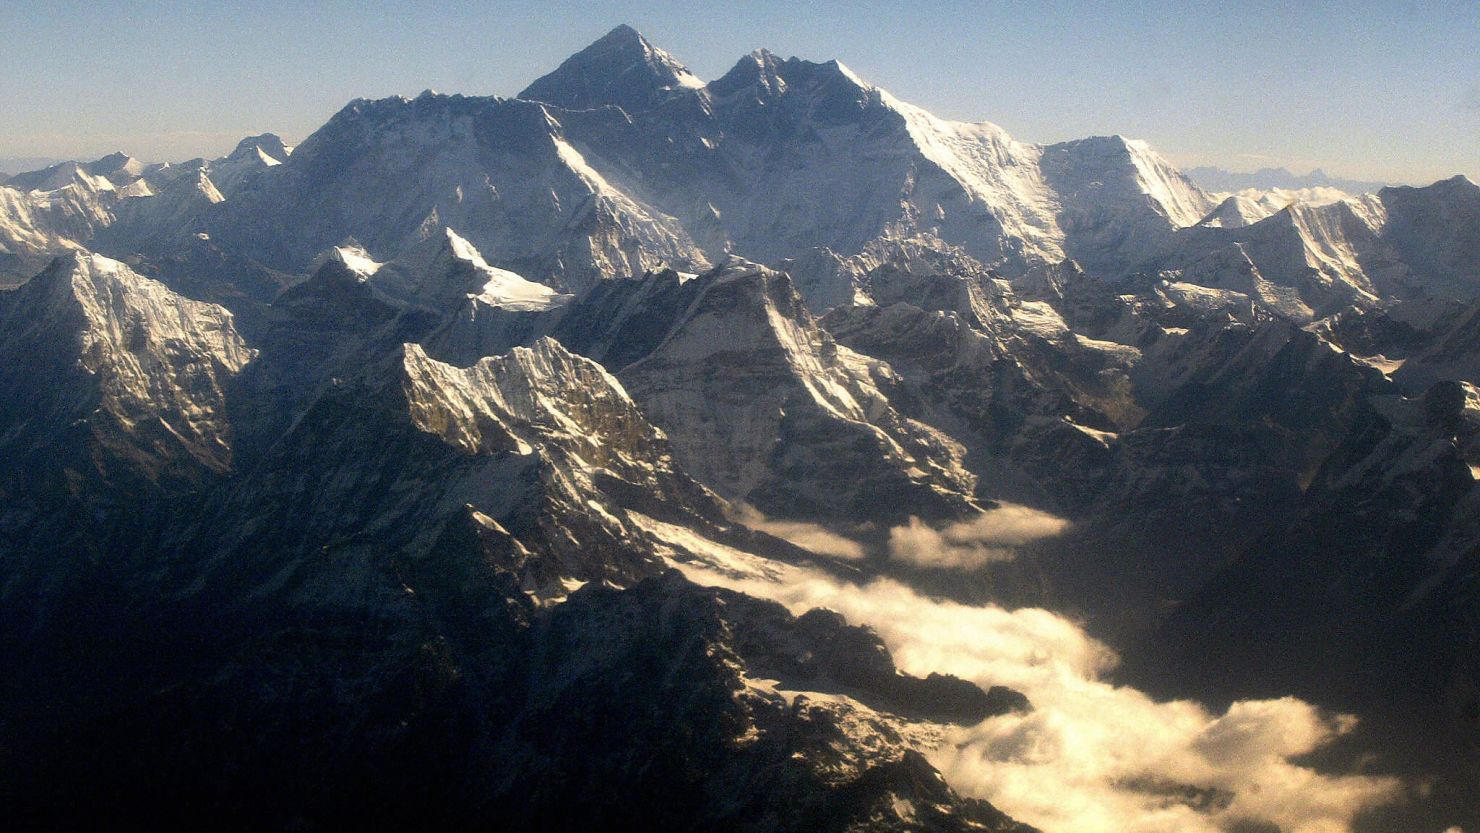 Mount Everest's summit was first reached in 1953 by Edmund Hillary and Tenzing Norgay.